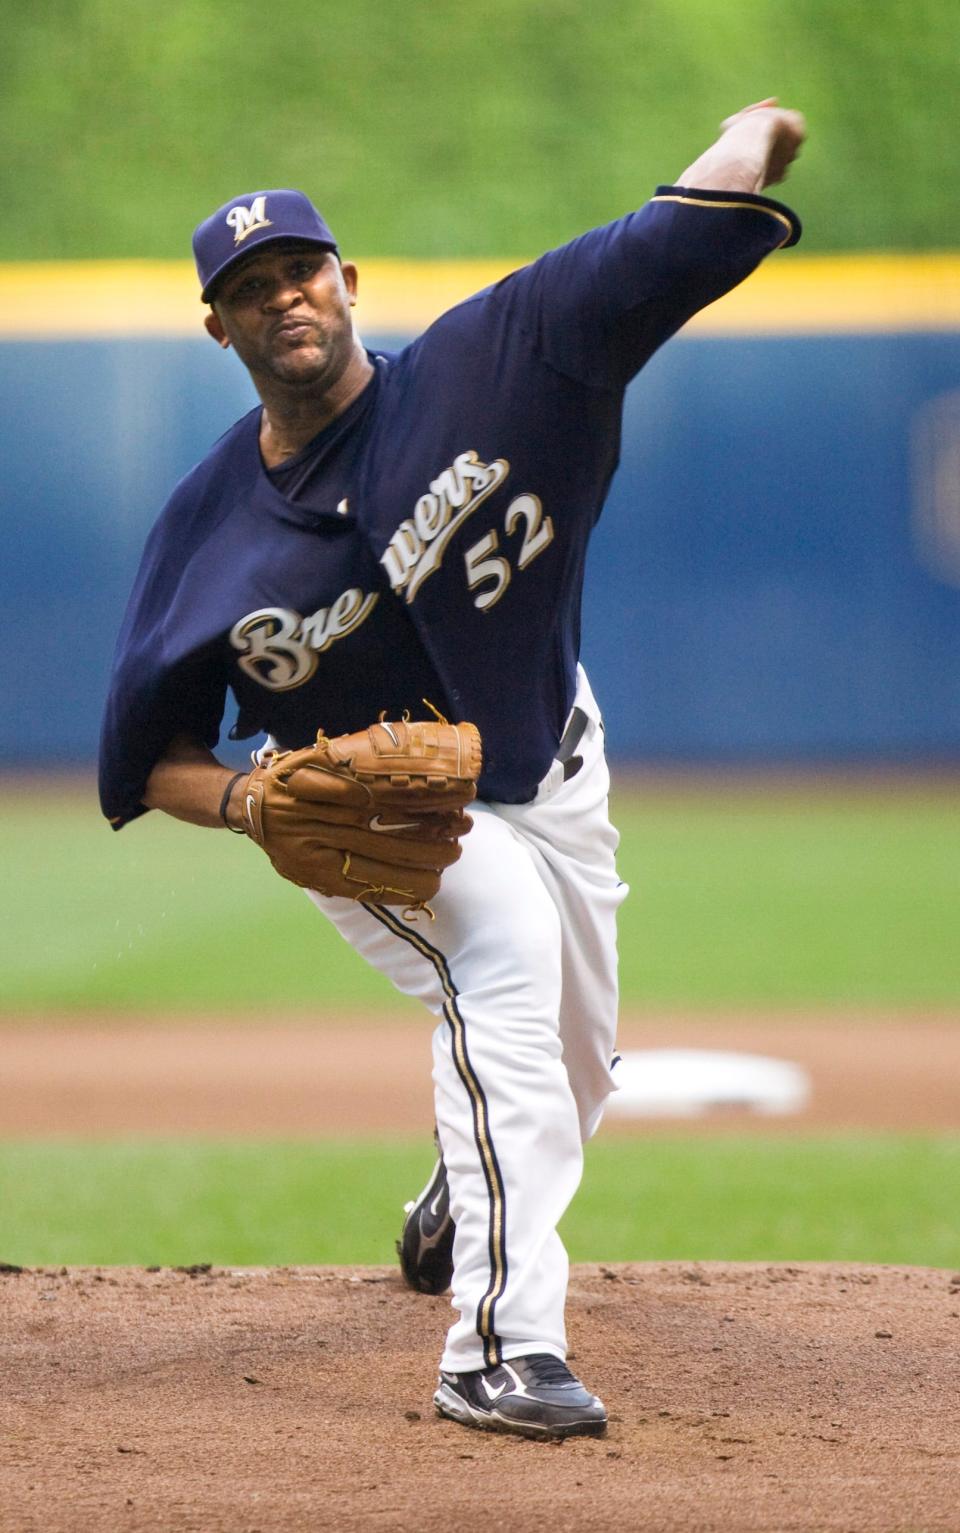 CC Sabathia throws a pitch against the Rockies on July 8, 2008.